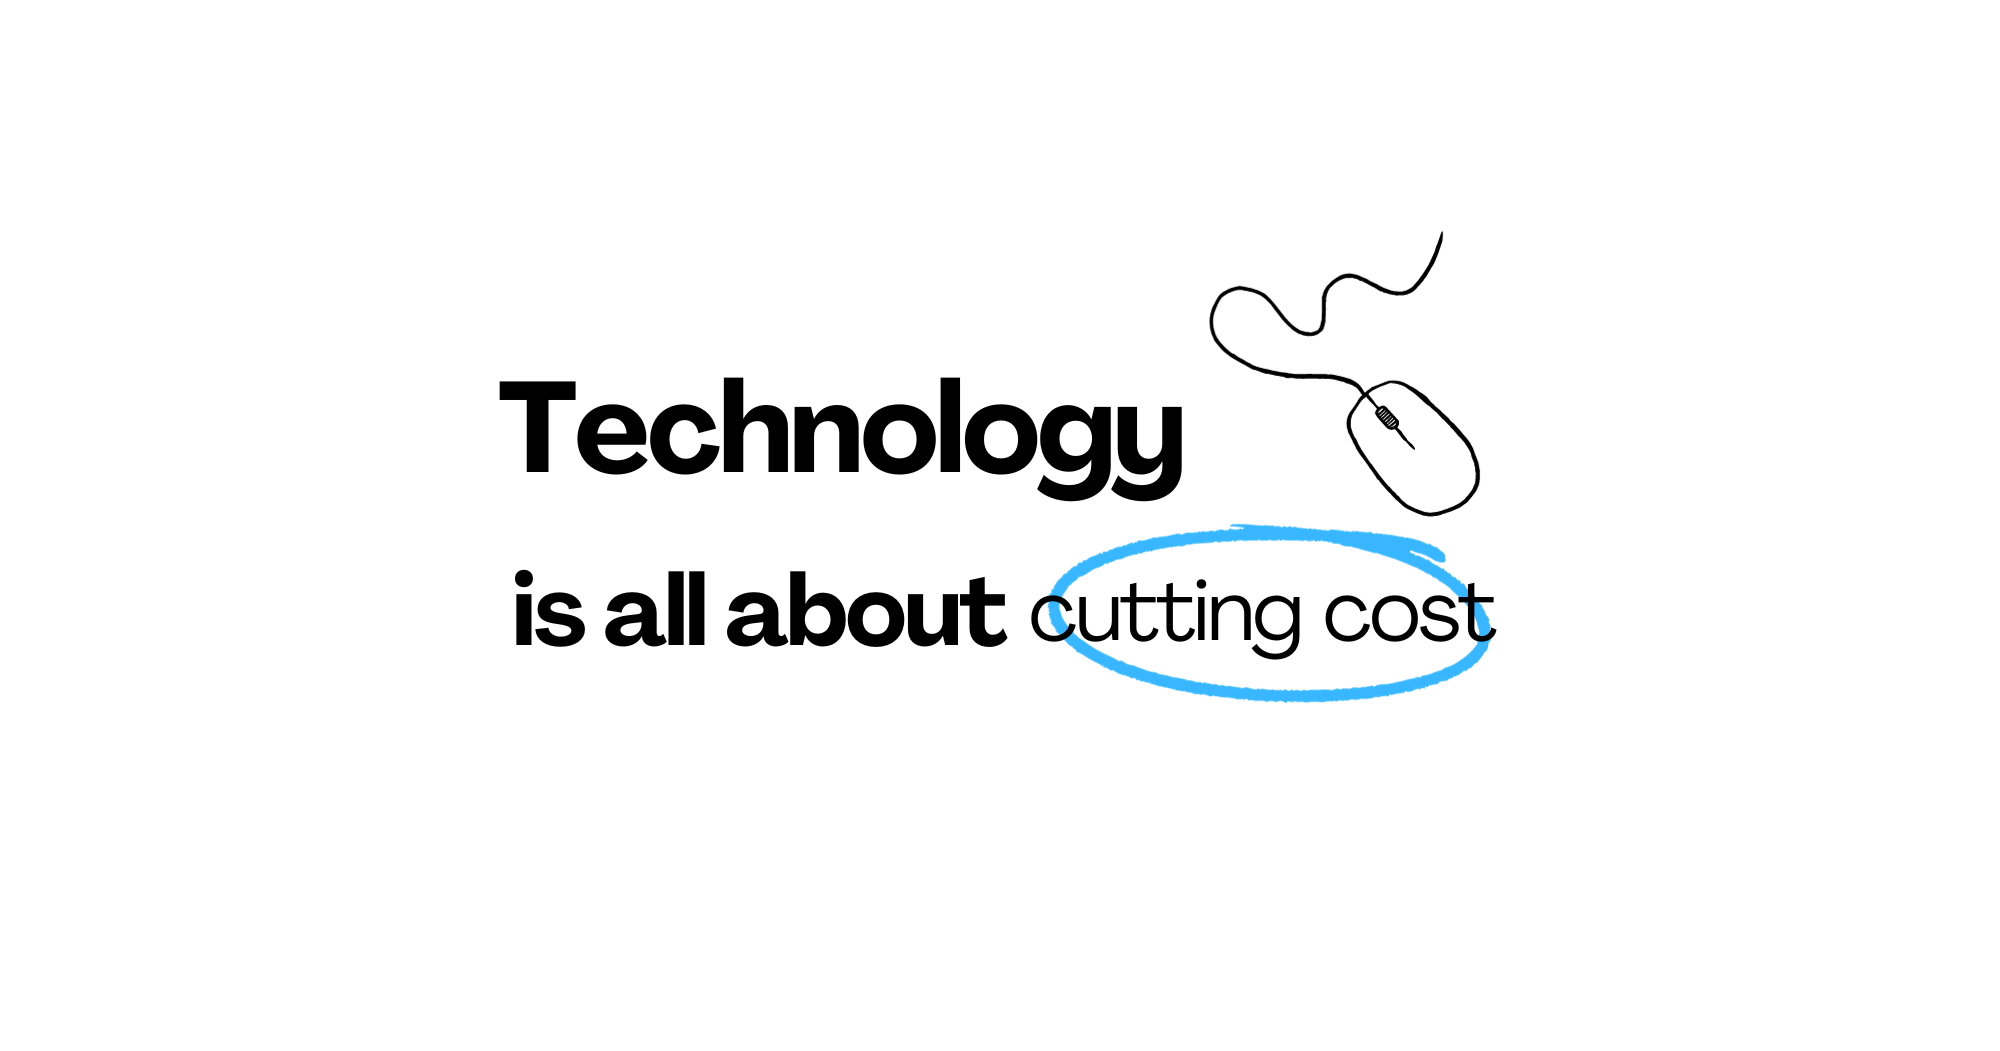 Technology is all about cutting costs